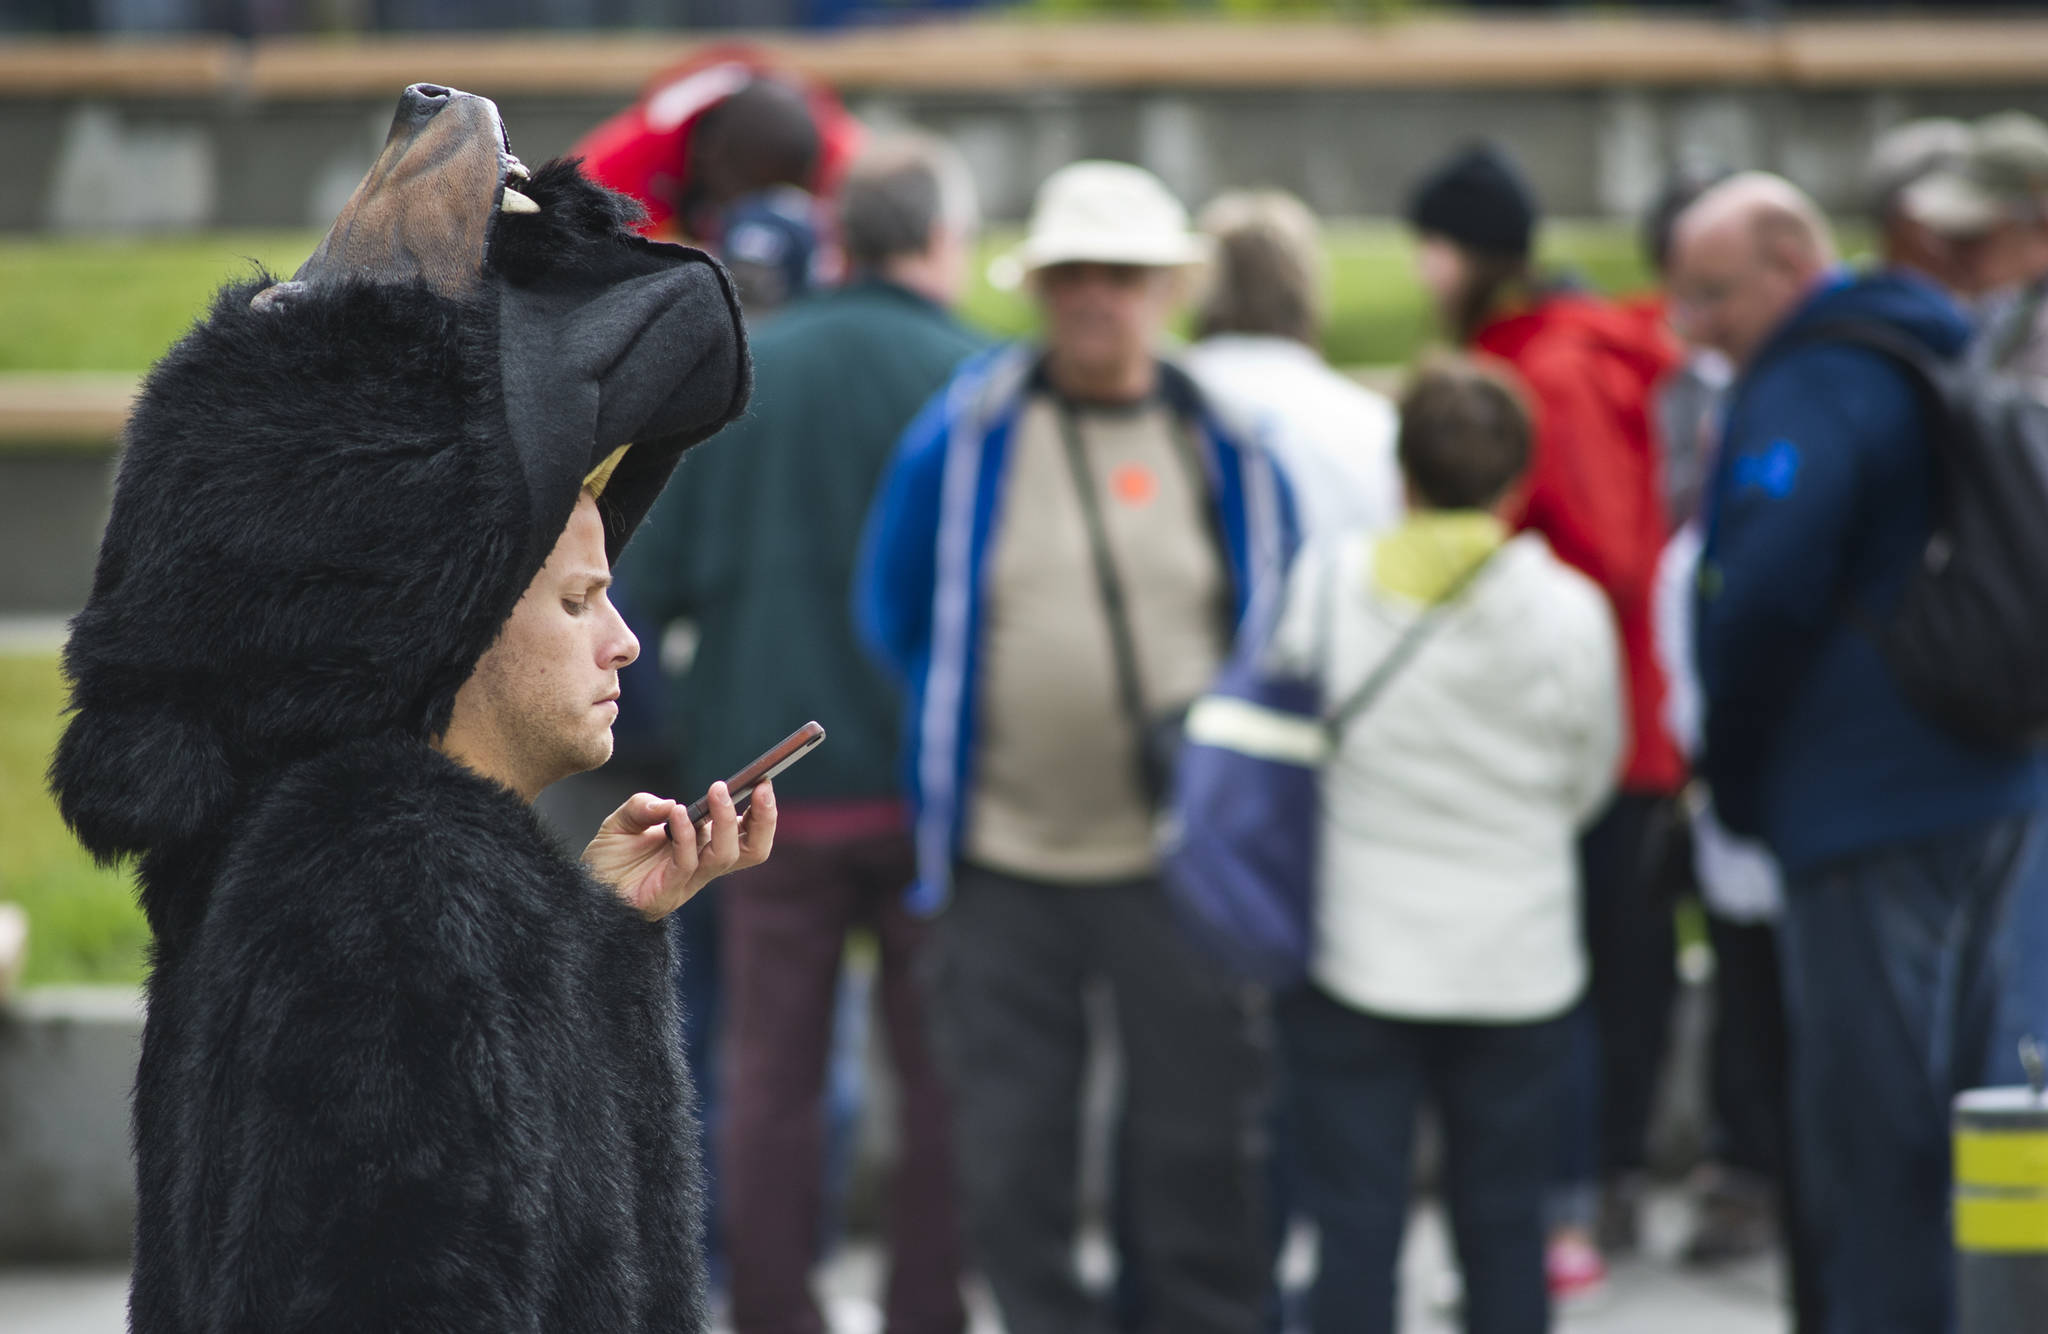 A bear-costumed employee from Holland America Line’s Noordam cruise ship checks his phone between sessions being photographed with arriving visitors at Marine Park in this June 2015 photo. 5G mobile network service which GCI announced Tuesday is coming to Alaska, will result in faster device speeds. (Michael Penn | Juneau Empire File)